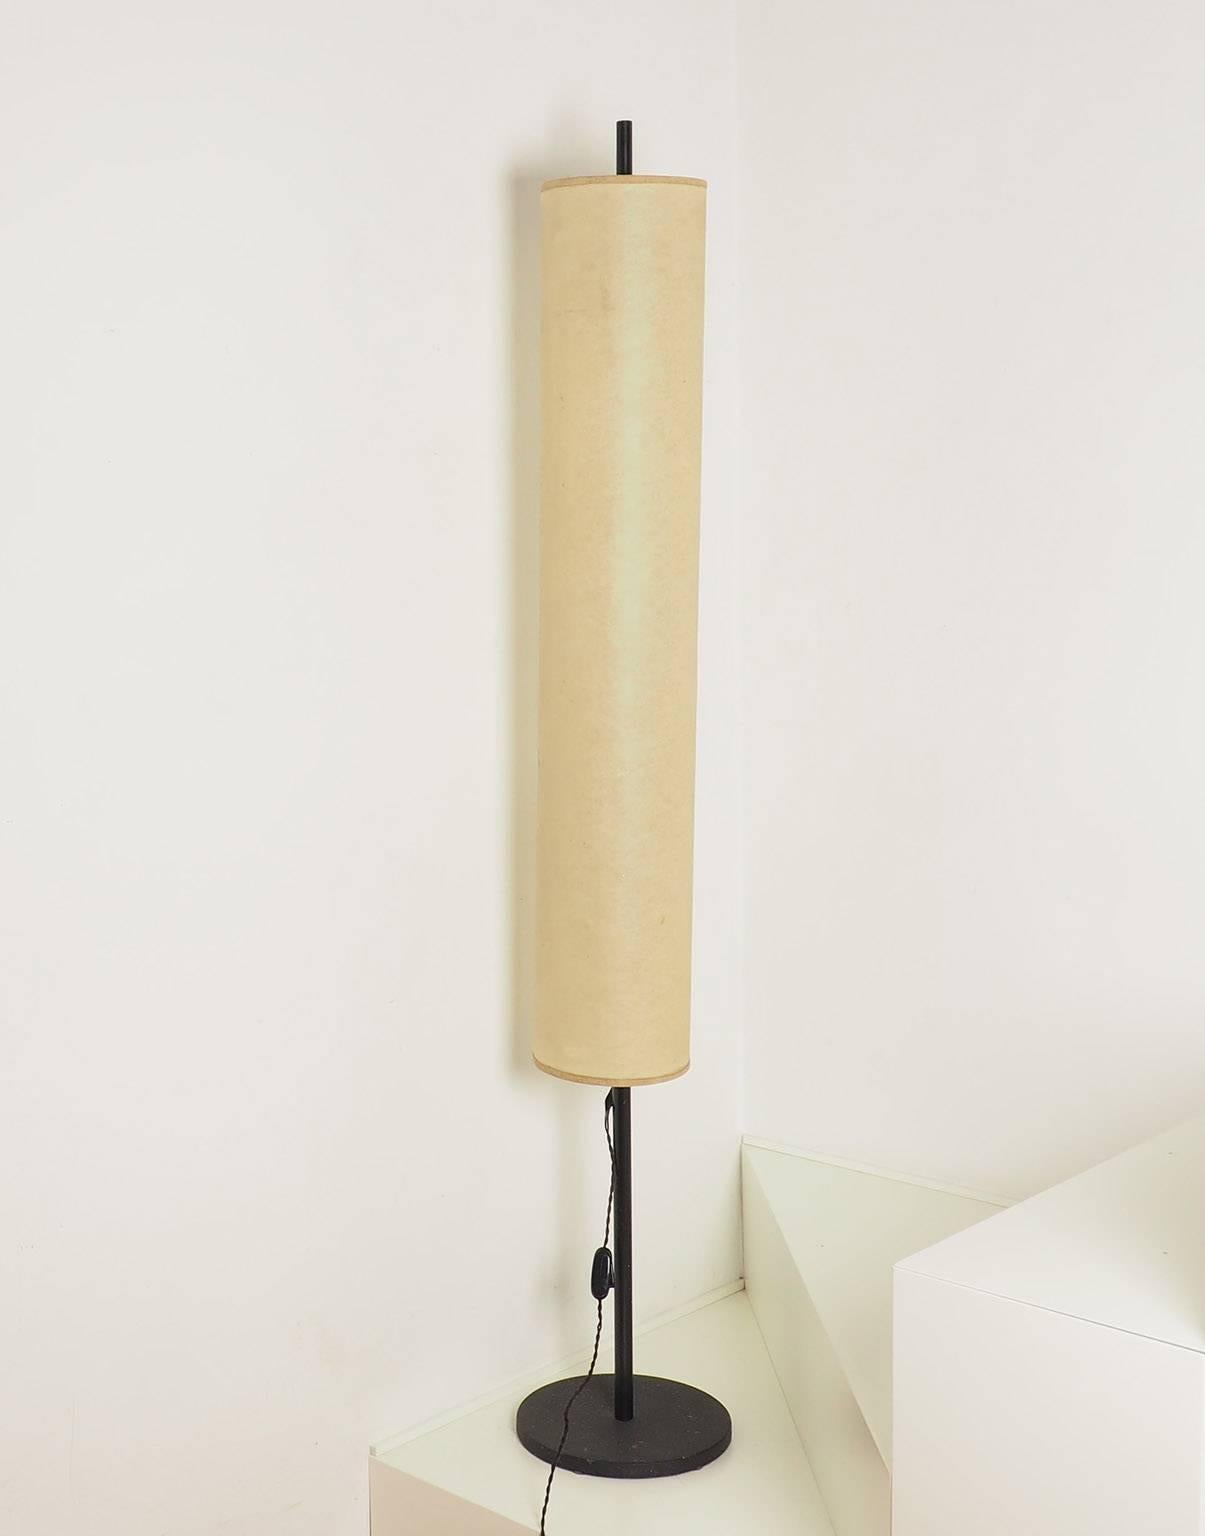 Slim and long-limbed shape. High quality together a simple and well proportioned design, for this lamp in the Arteluce style. Black Craquele' cast iron basement with black lacquered brass structure and its original parchment paper shade.